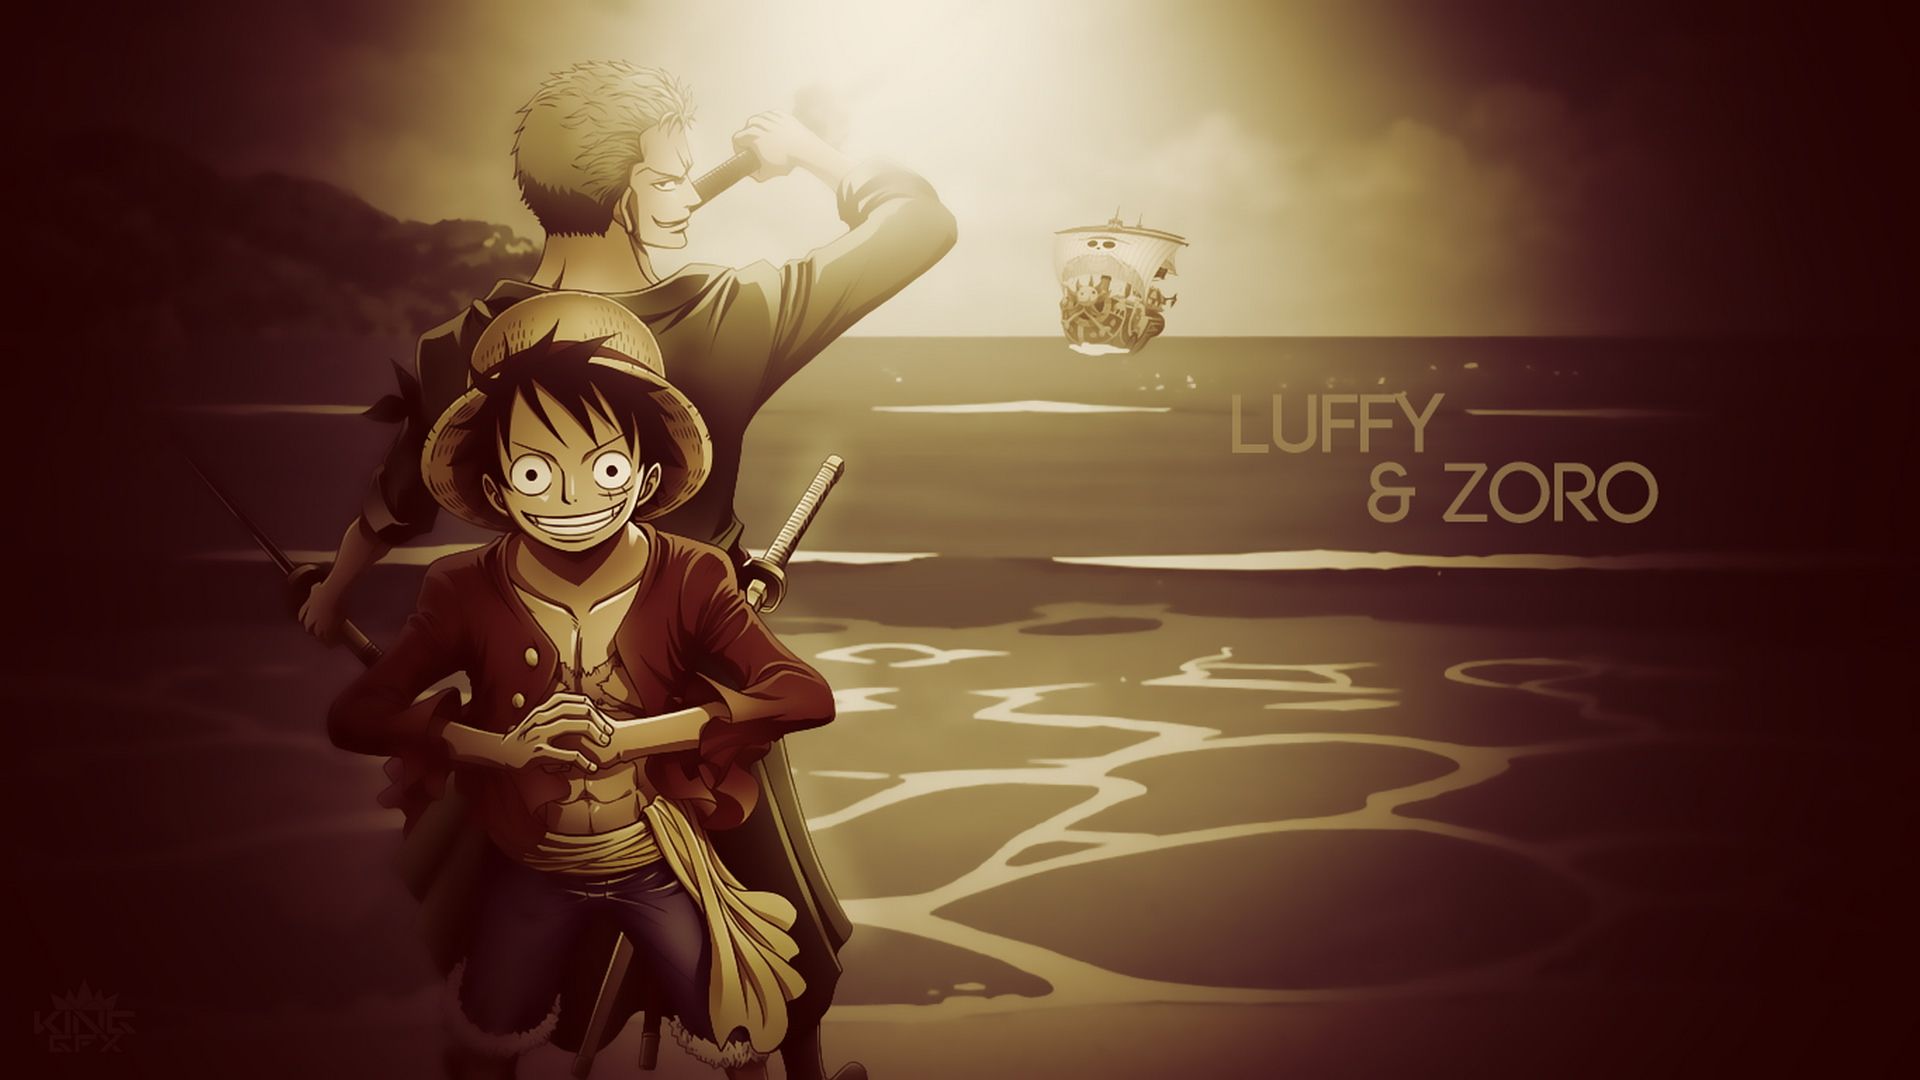 Free download Luffy One Piece Monkey D Luffy Wallpaper 37712135 [1920x1080] for your Desktop, Mobile & Tablet. Explore Luffy Wallpaper. One Piece Wallpaper Luffy, One Piece Desktop Wallpaper, Monkey D Luffy Wallpaper